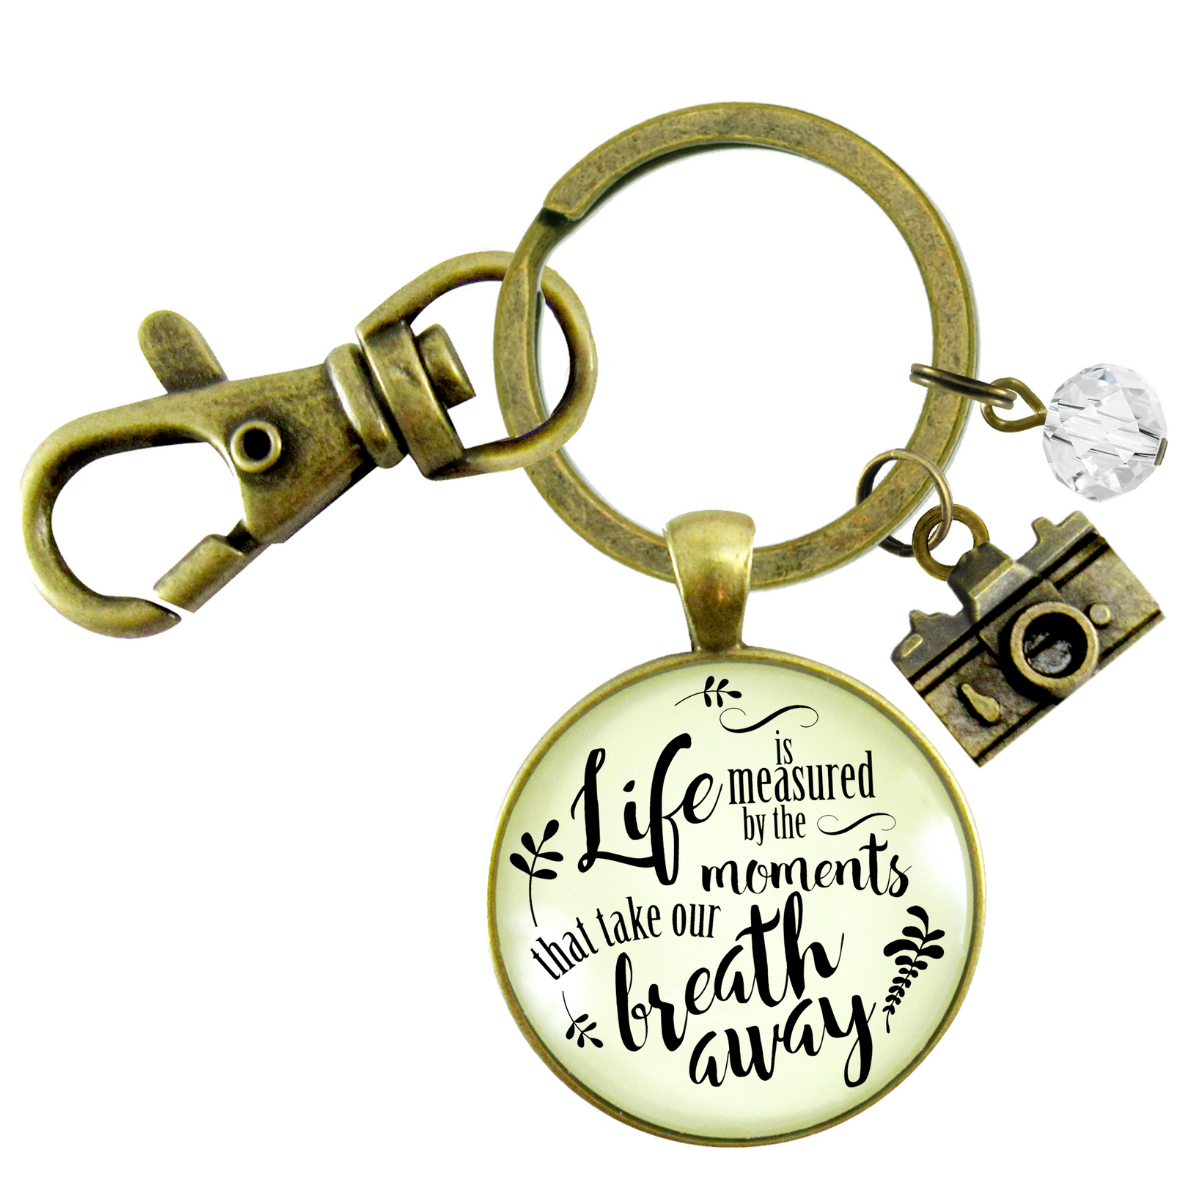 Life Keychain Measured By Moments That Take Our Breath Away Memories Jewelry Camera - Gutsy Goodness Handmade Jewelry;Life Keychain Measured By Moments That Take Our Breath Away Memories Jewelry Camera - Gutsy Goodness Handmade Jewelry Gifts